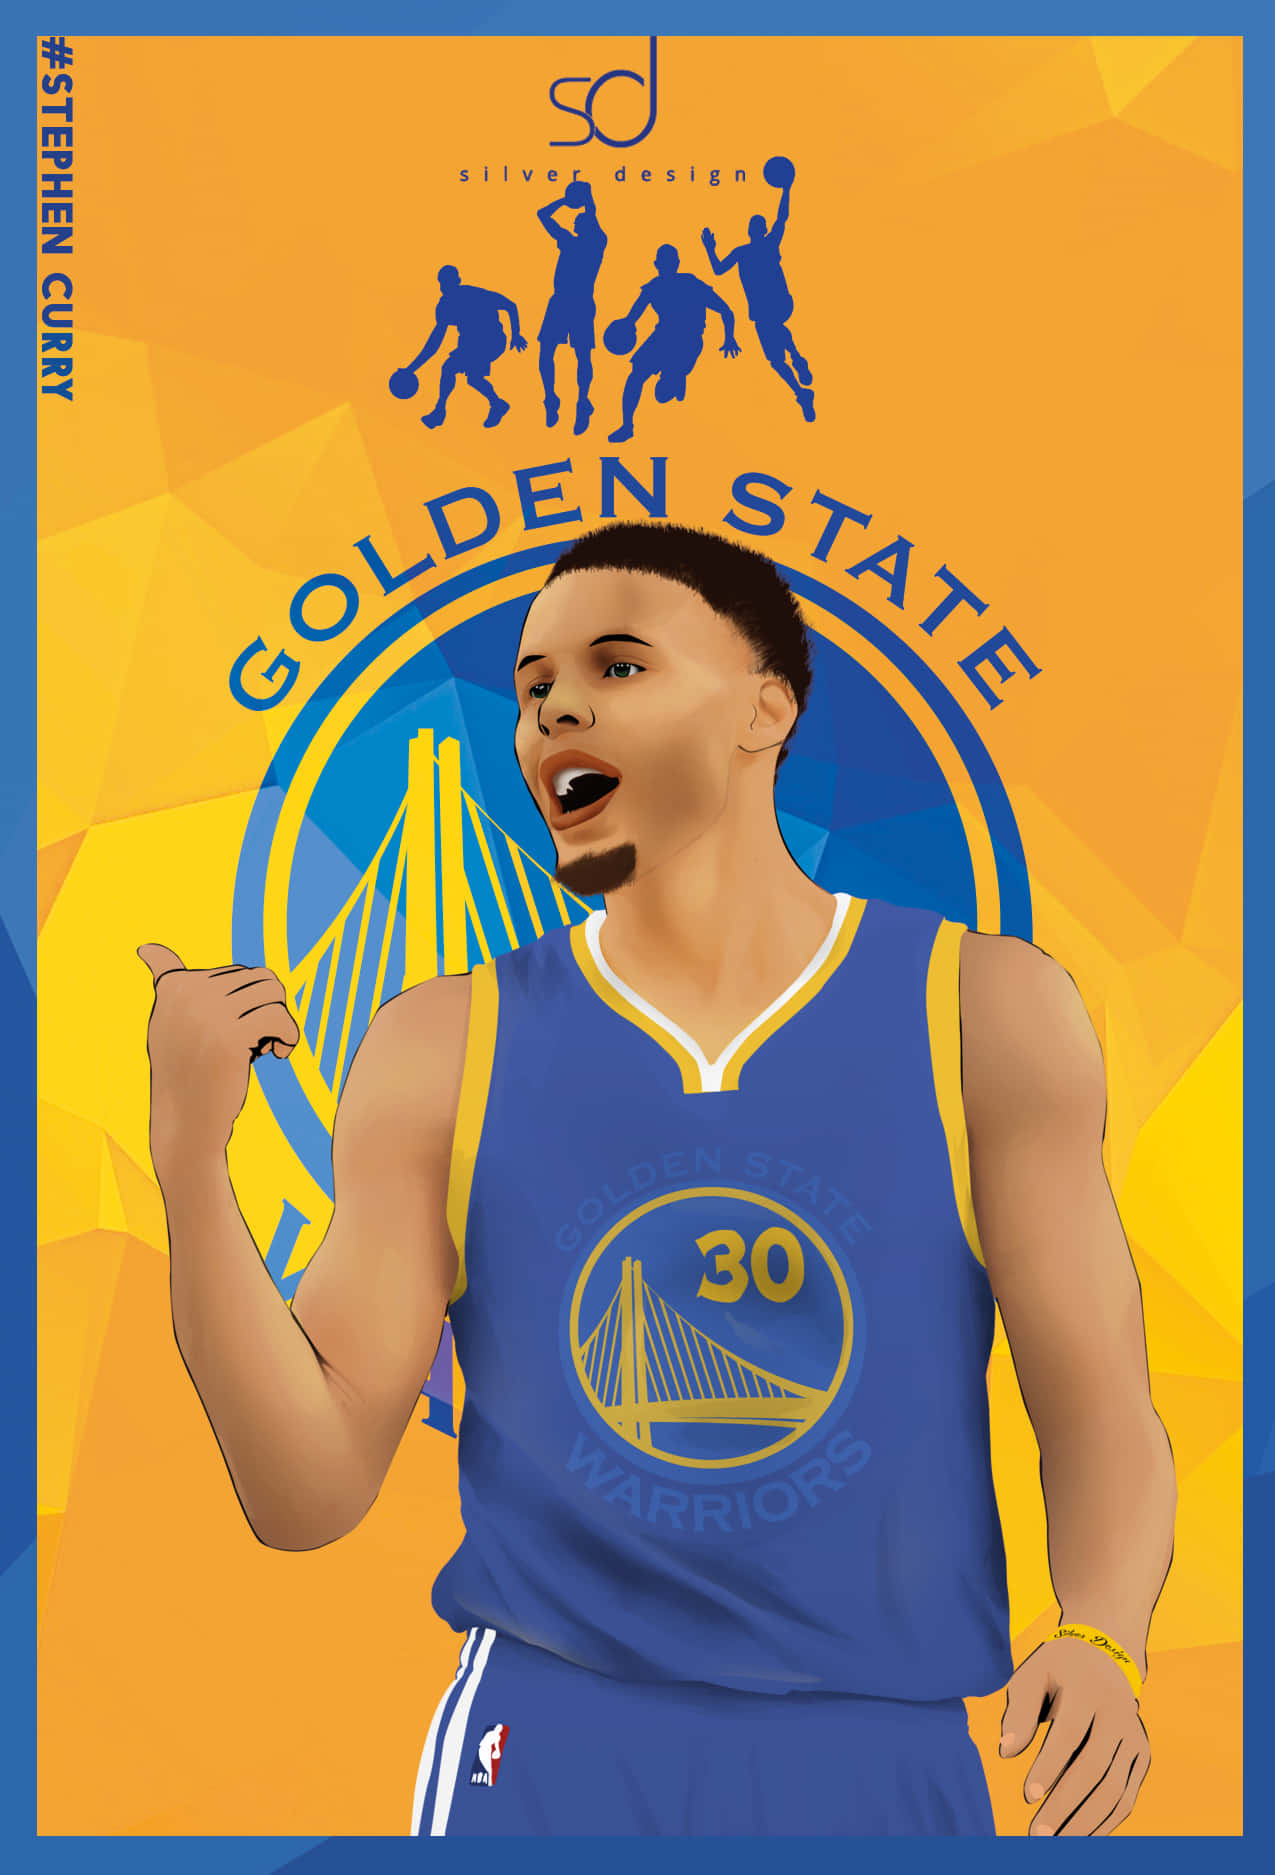 Stephen Curry strikes again with another impressive three-pointer! Wallpaper